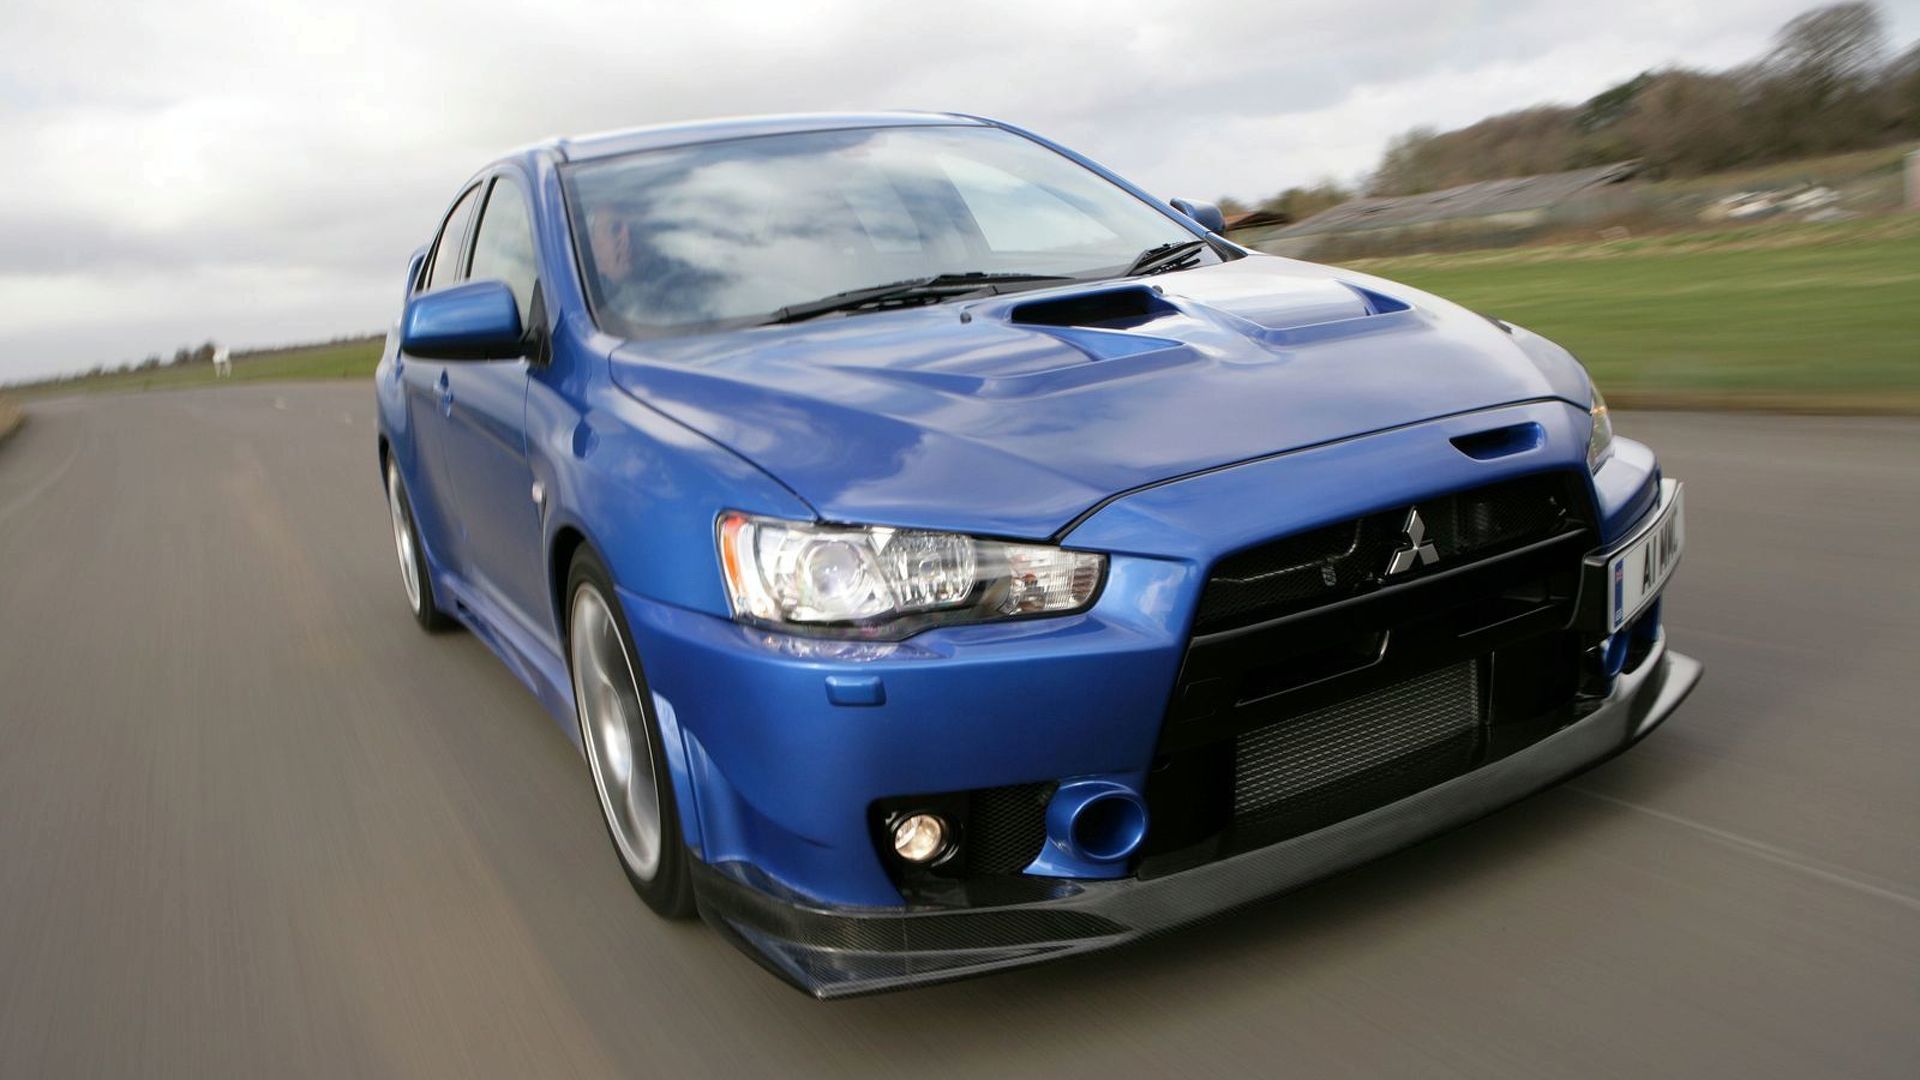 Mitsubishi Evo to be axed in 2013 - report